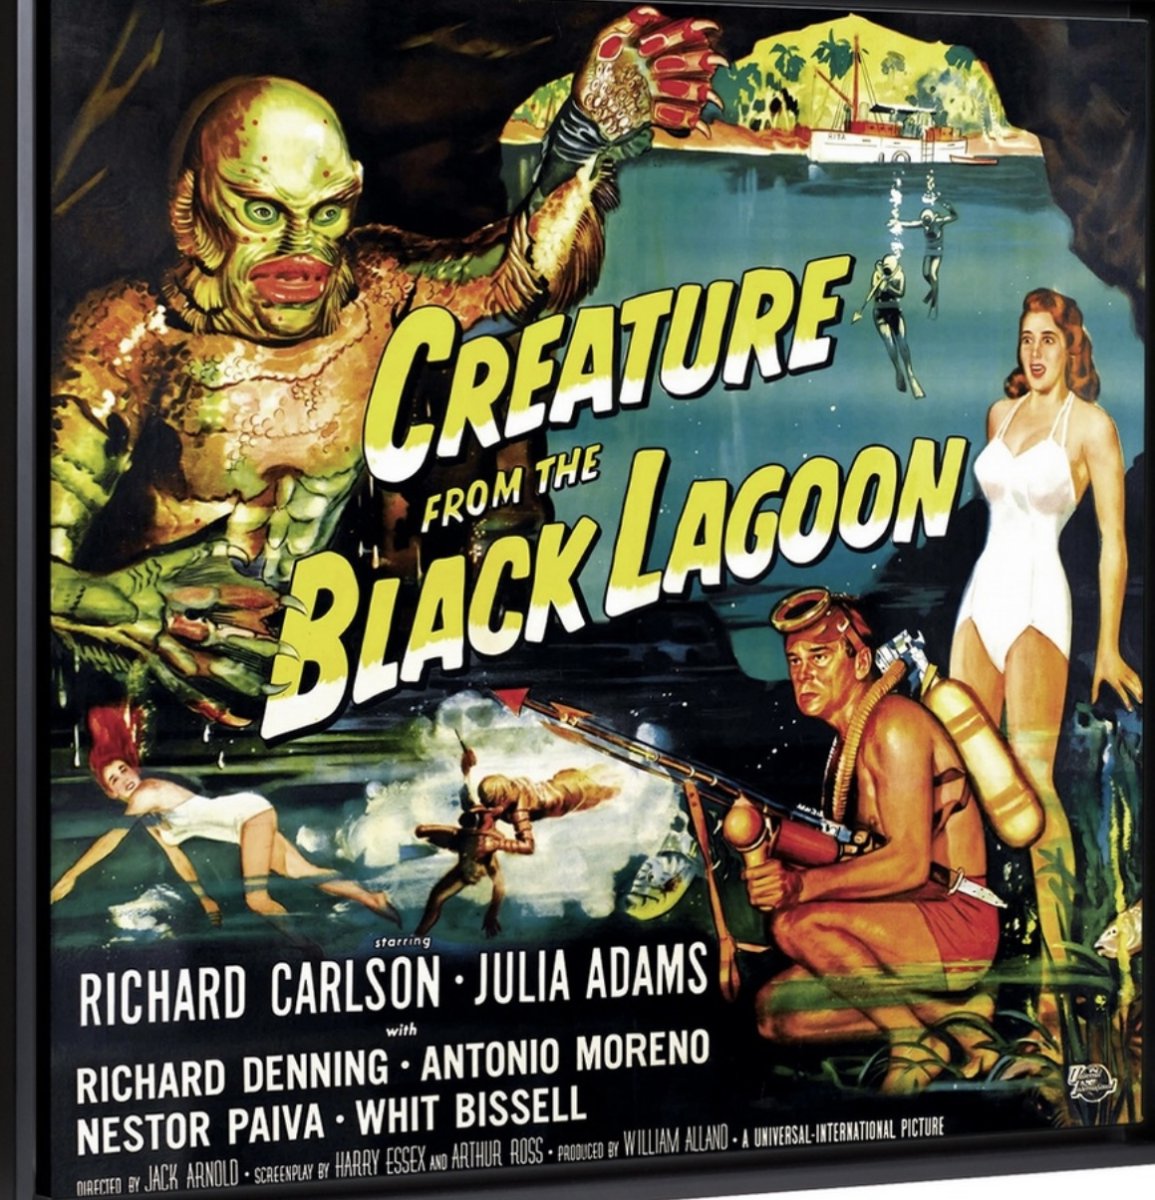 Creature from the Black Lagoon Poster.jpeg